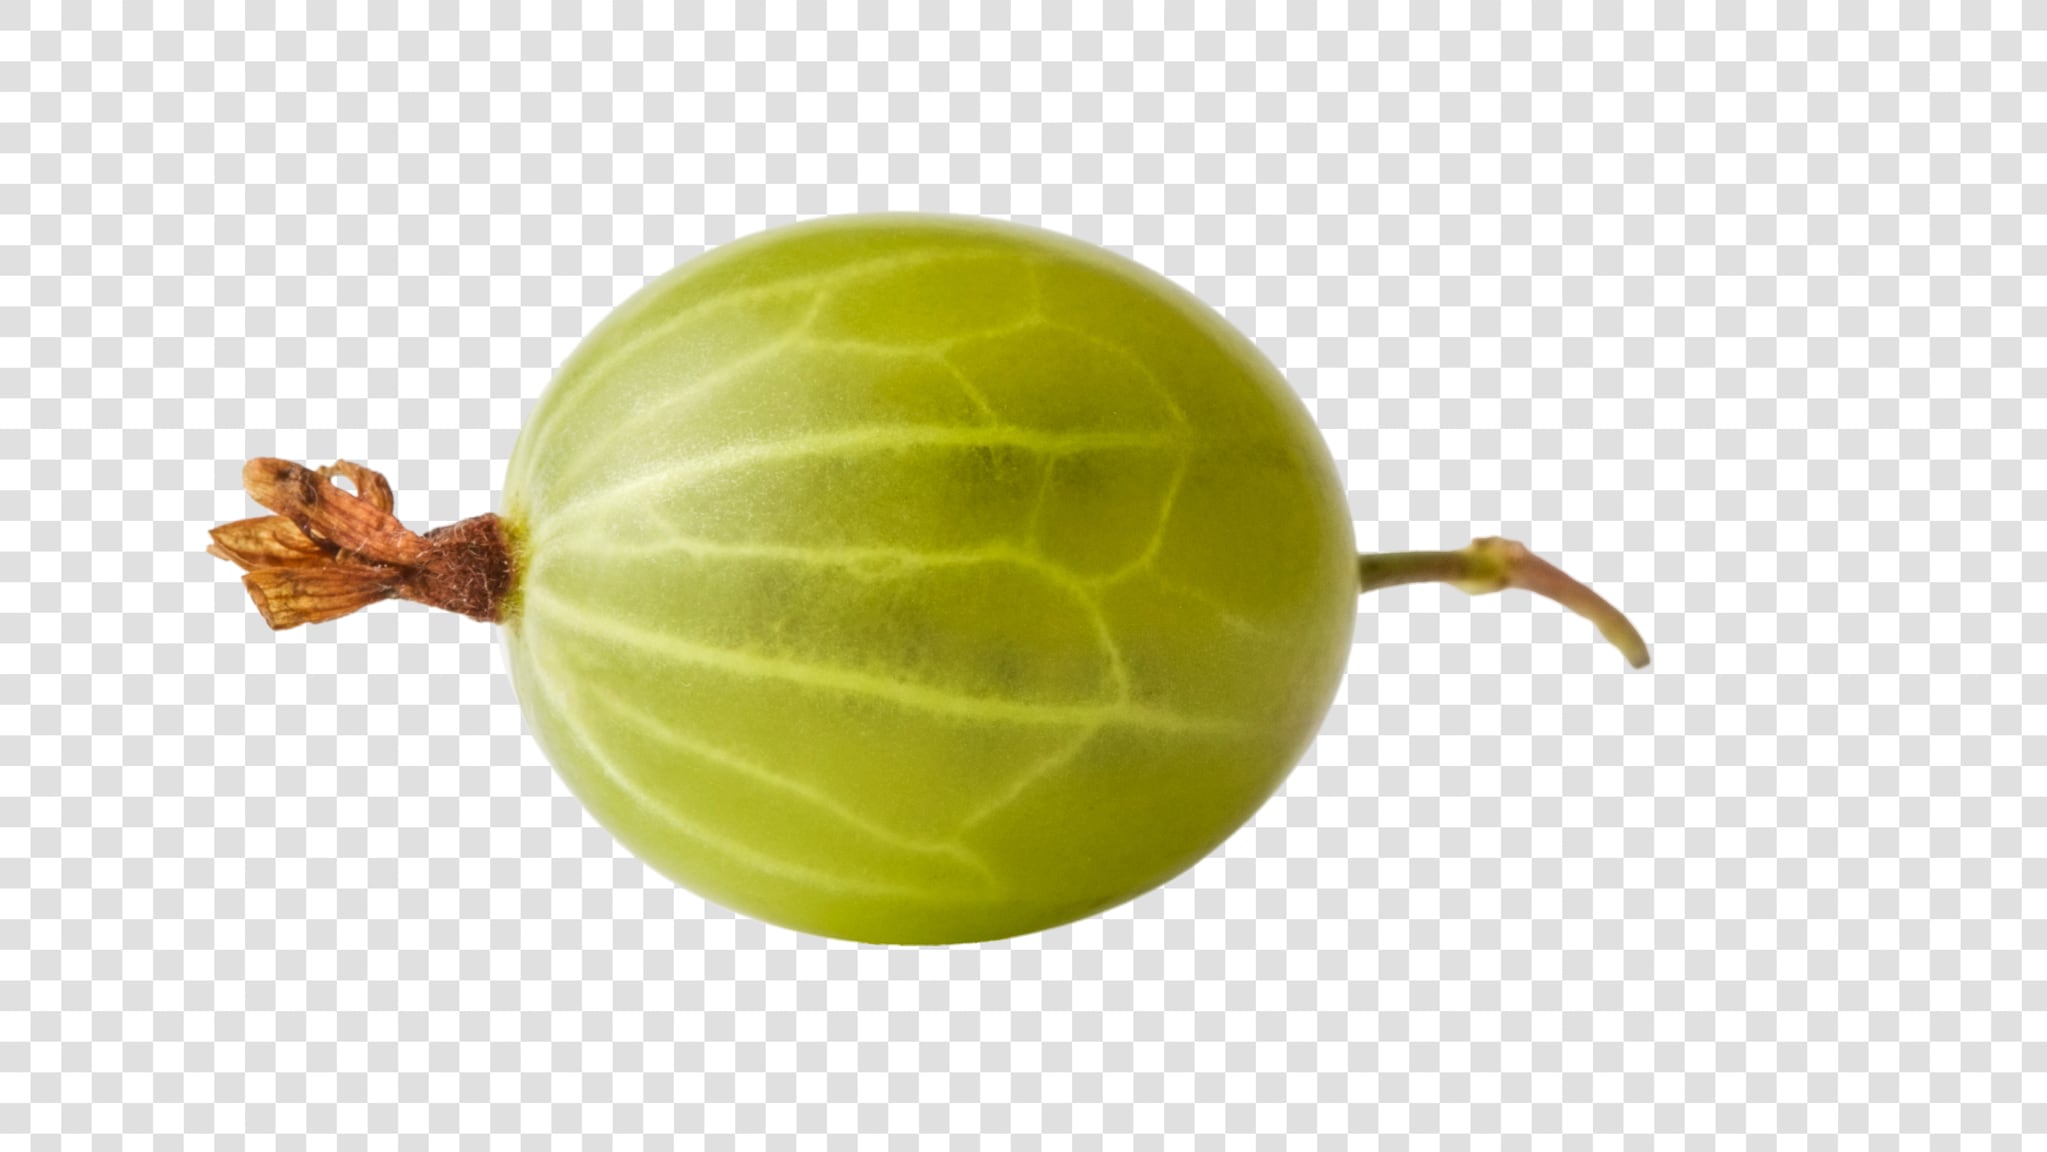 Gooseberry image asset with transparent background